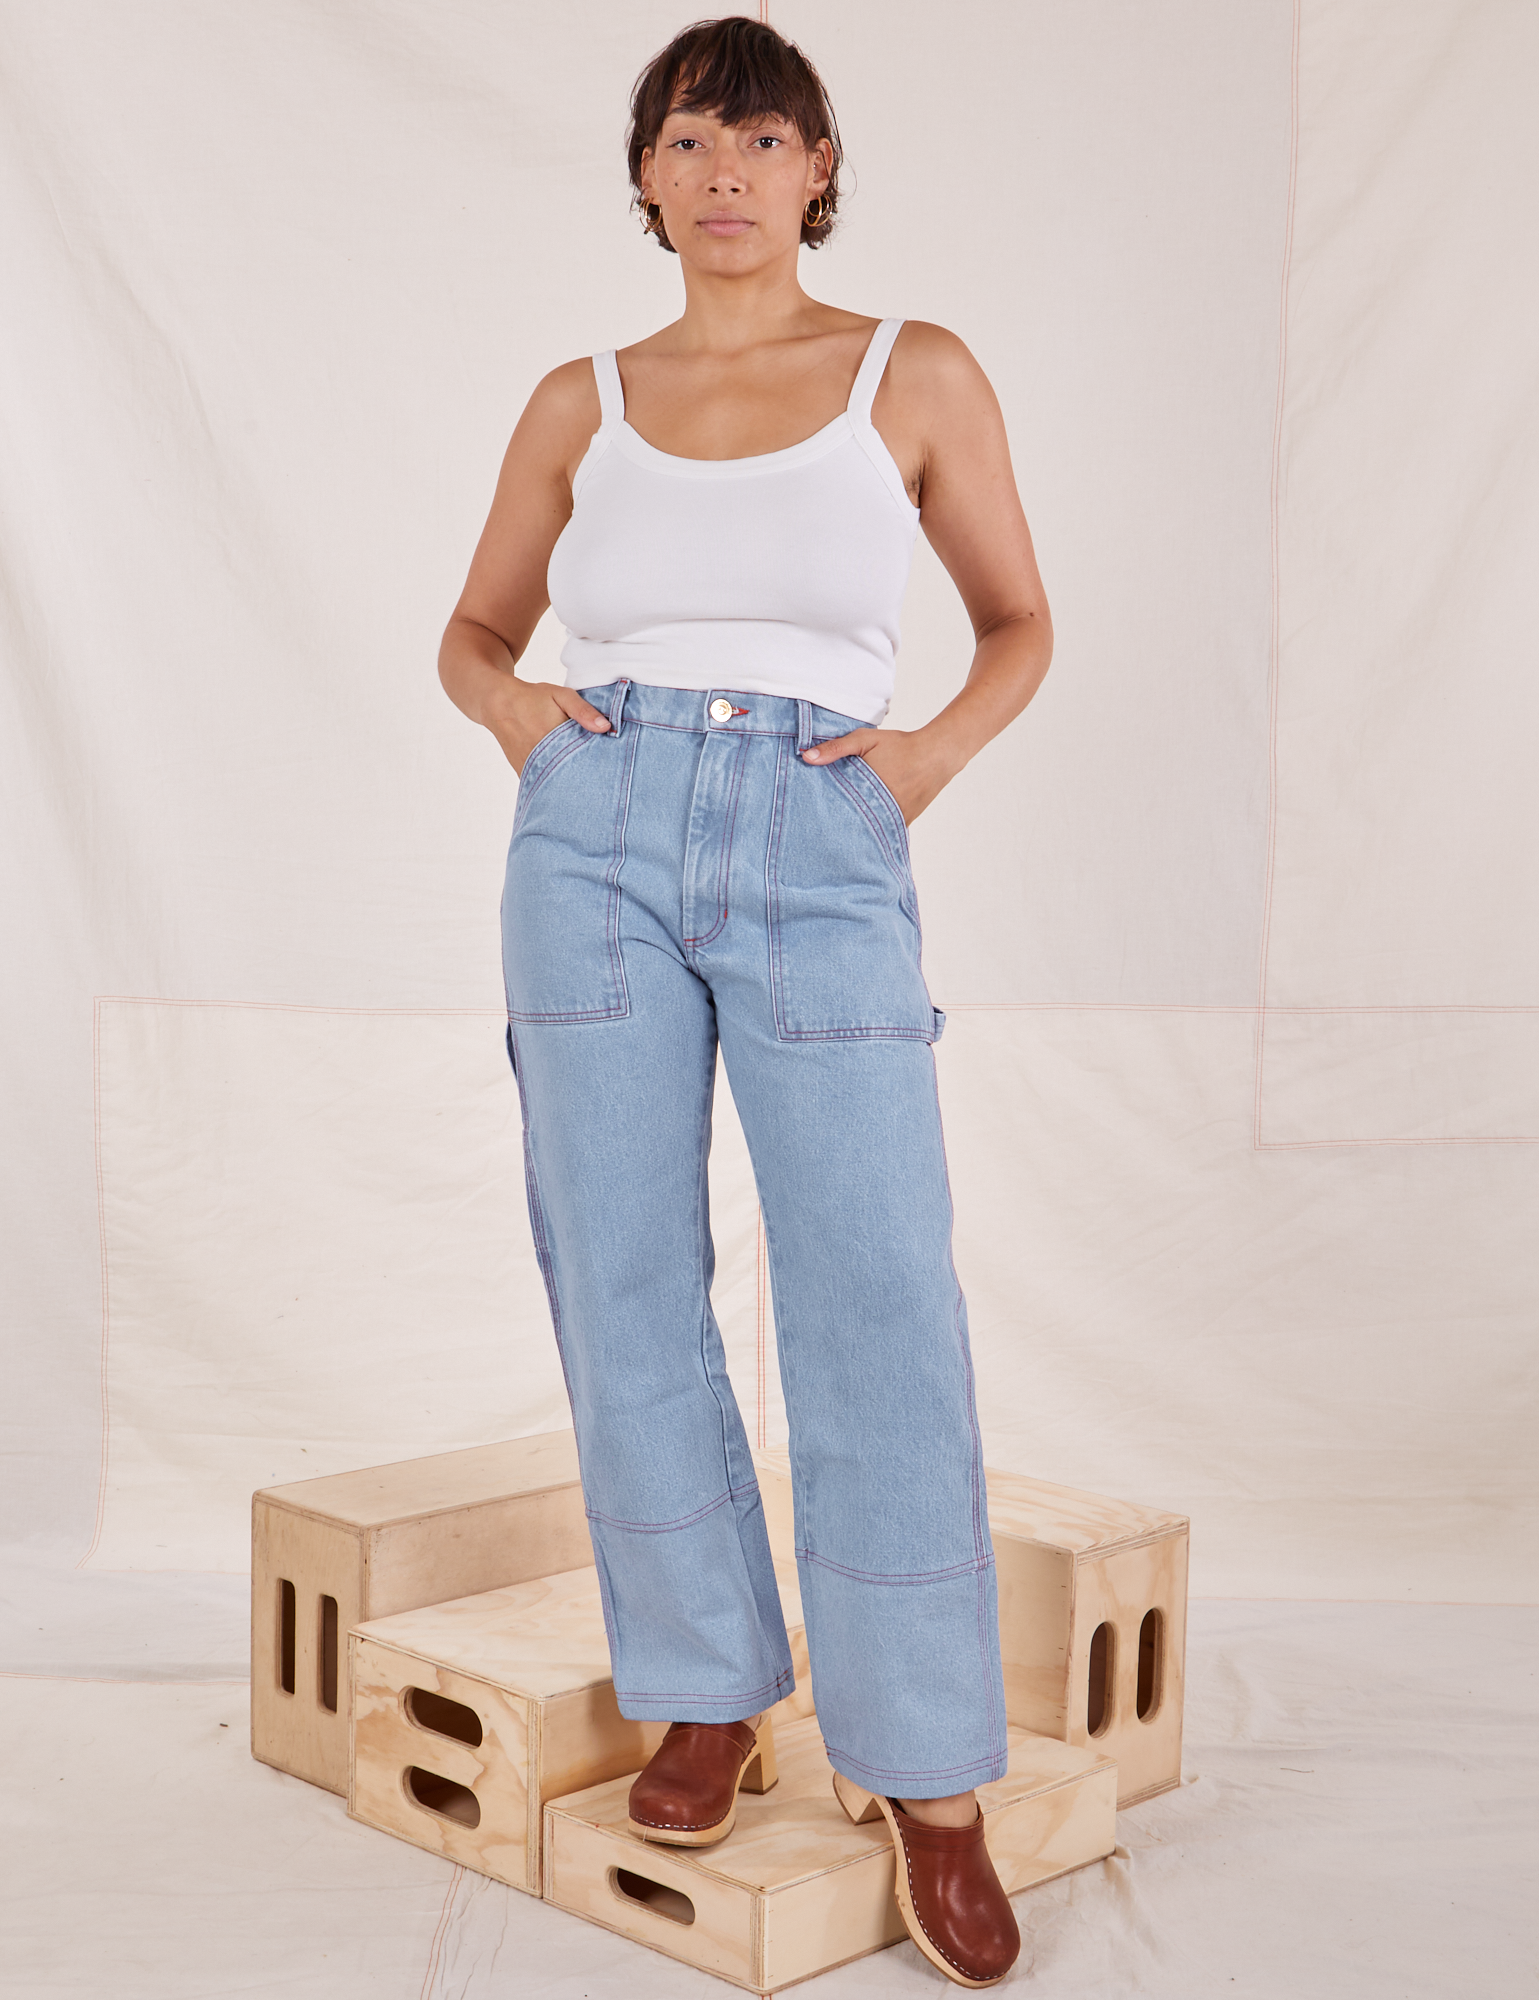 Tiara is 5&#39;4&quot; and wearing S Carpenter Jeans in Light Wash paired with vintage off-white Cami